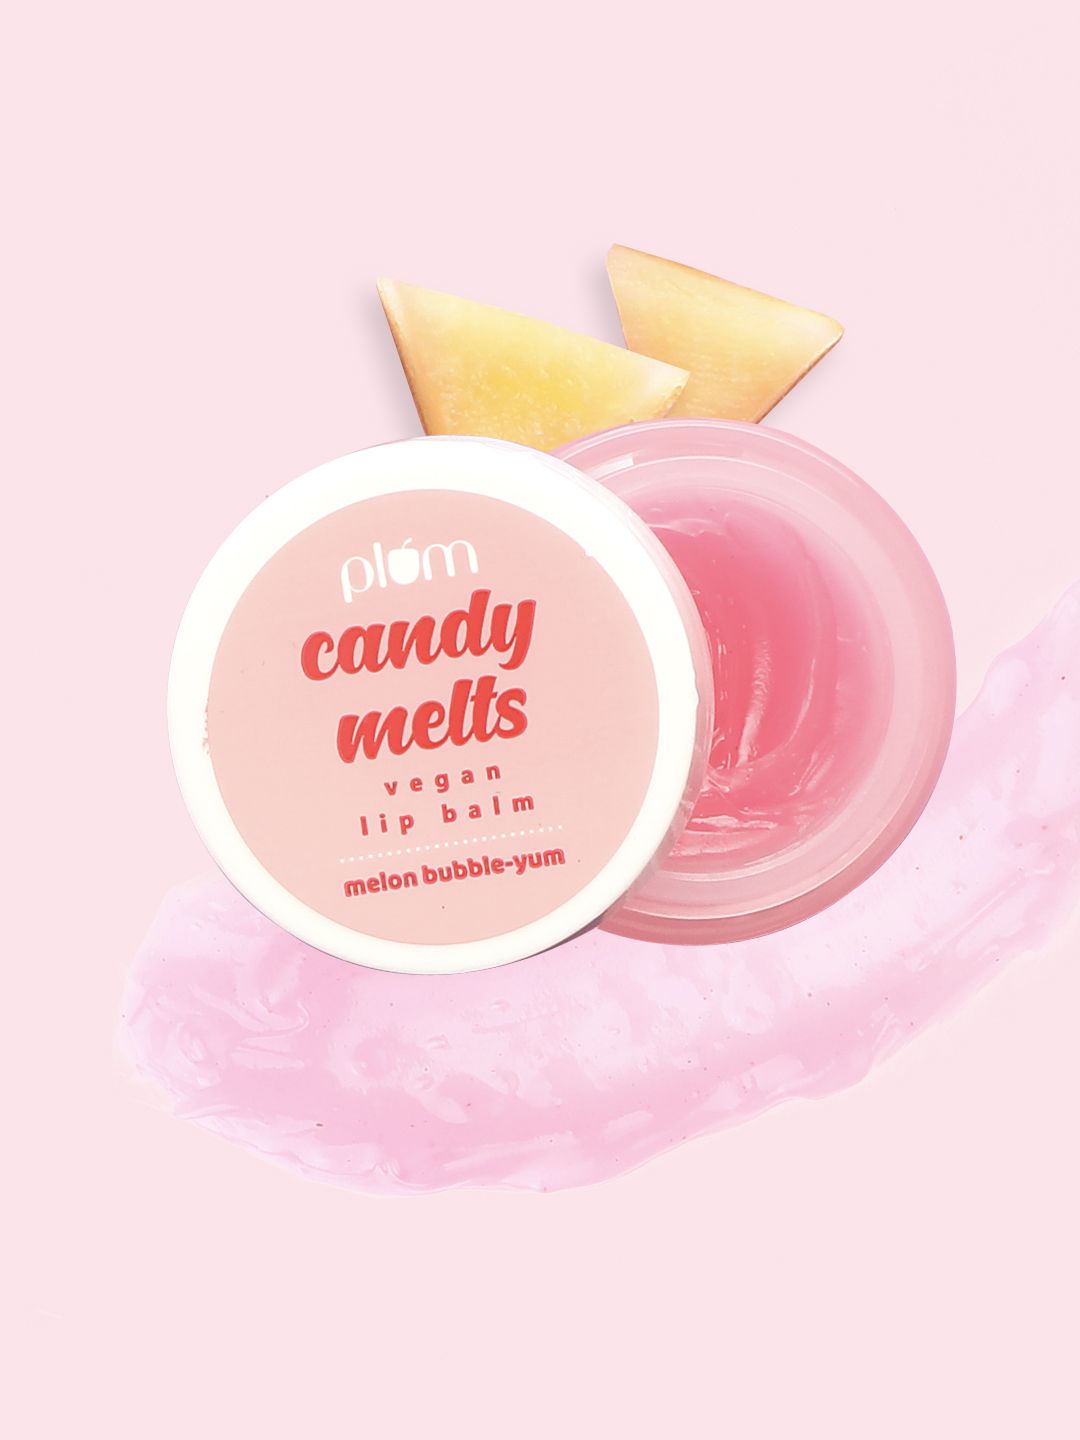 Plum Candy Melts Vegan Lip Balm with Cocoa Butter - Melon Bubble Yum - 12g Price in India